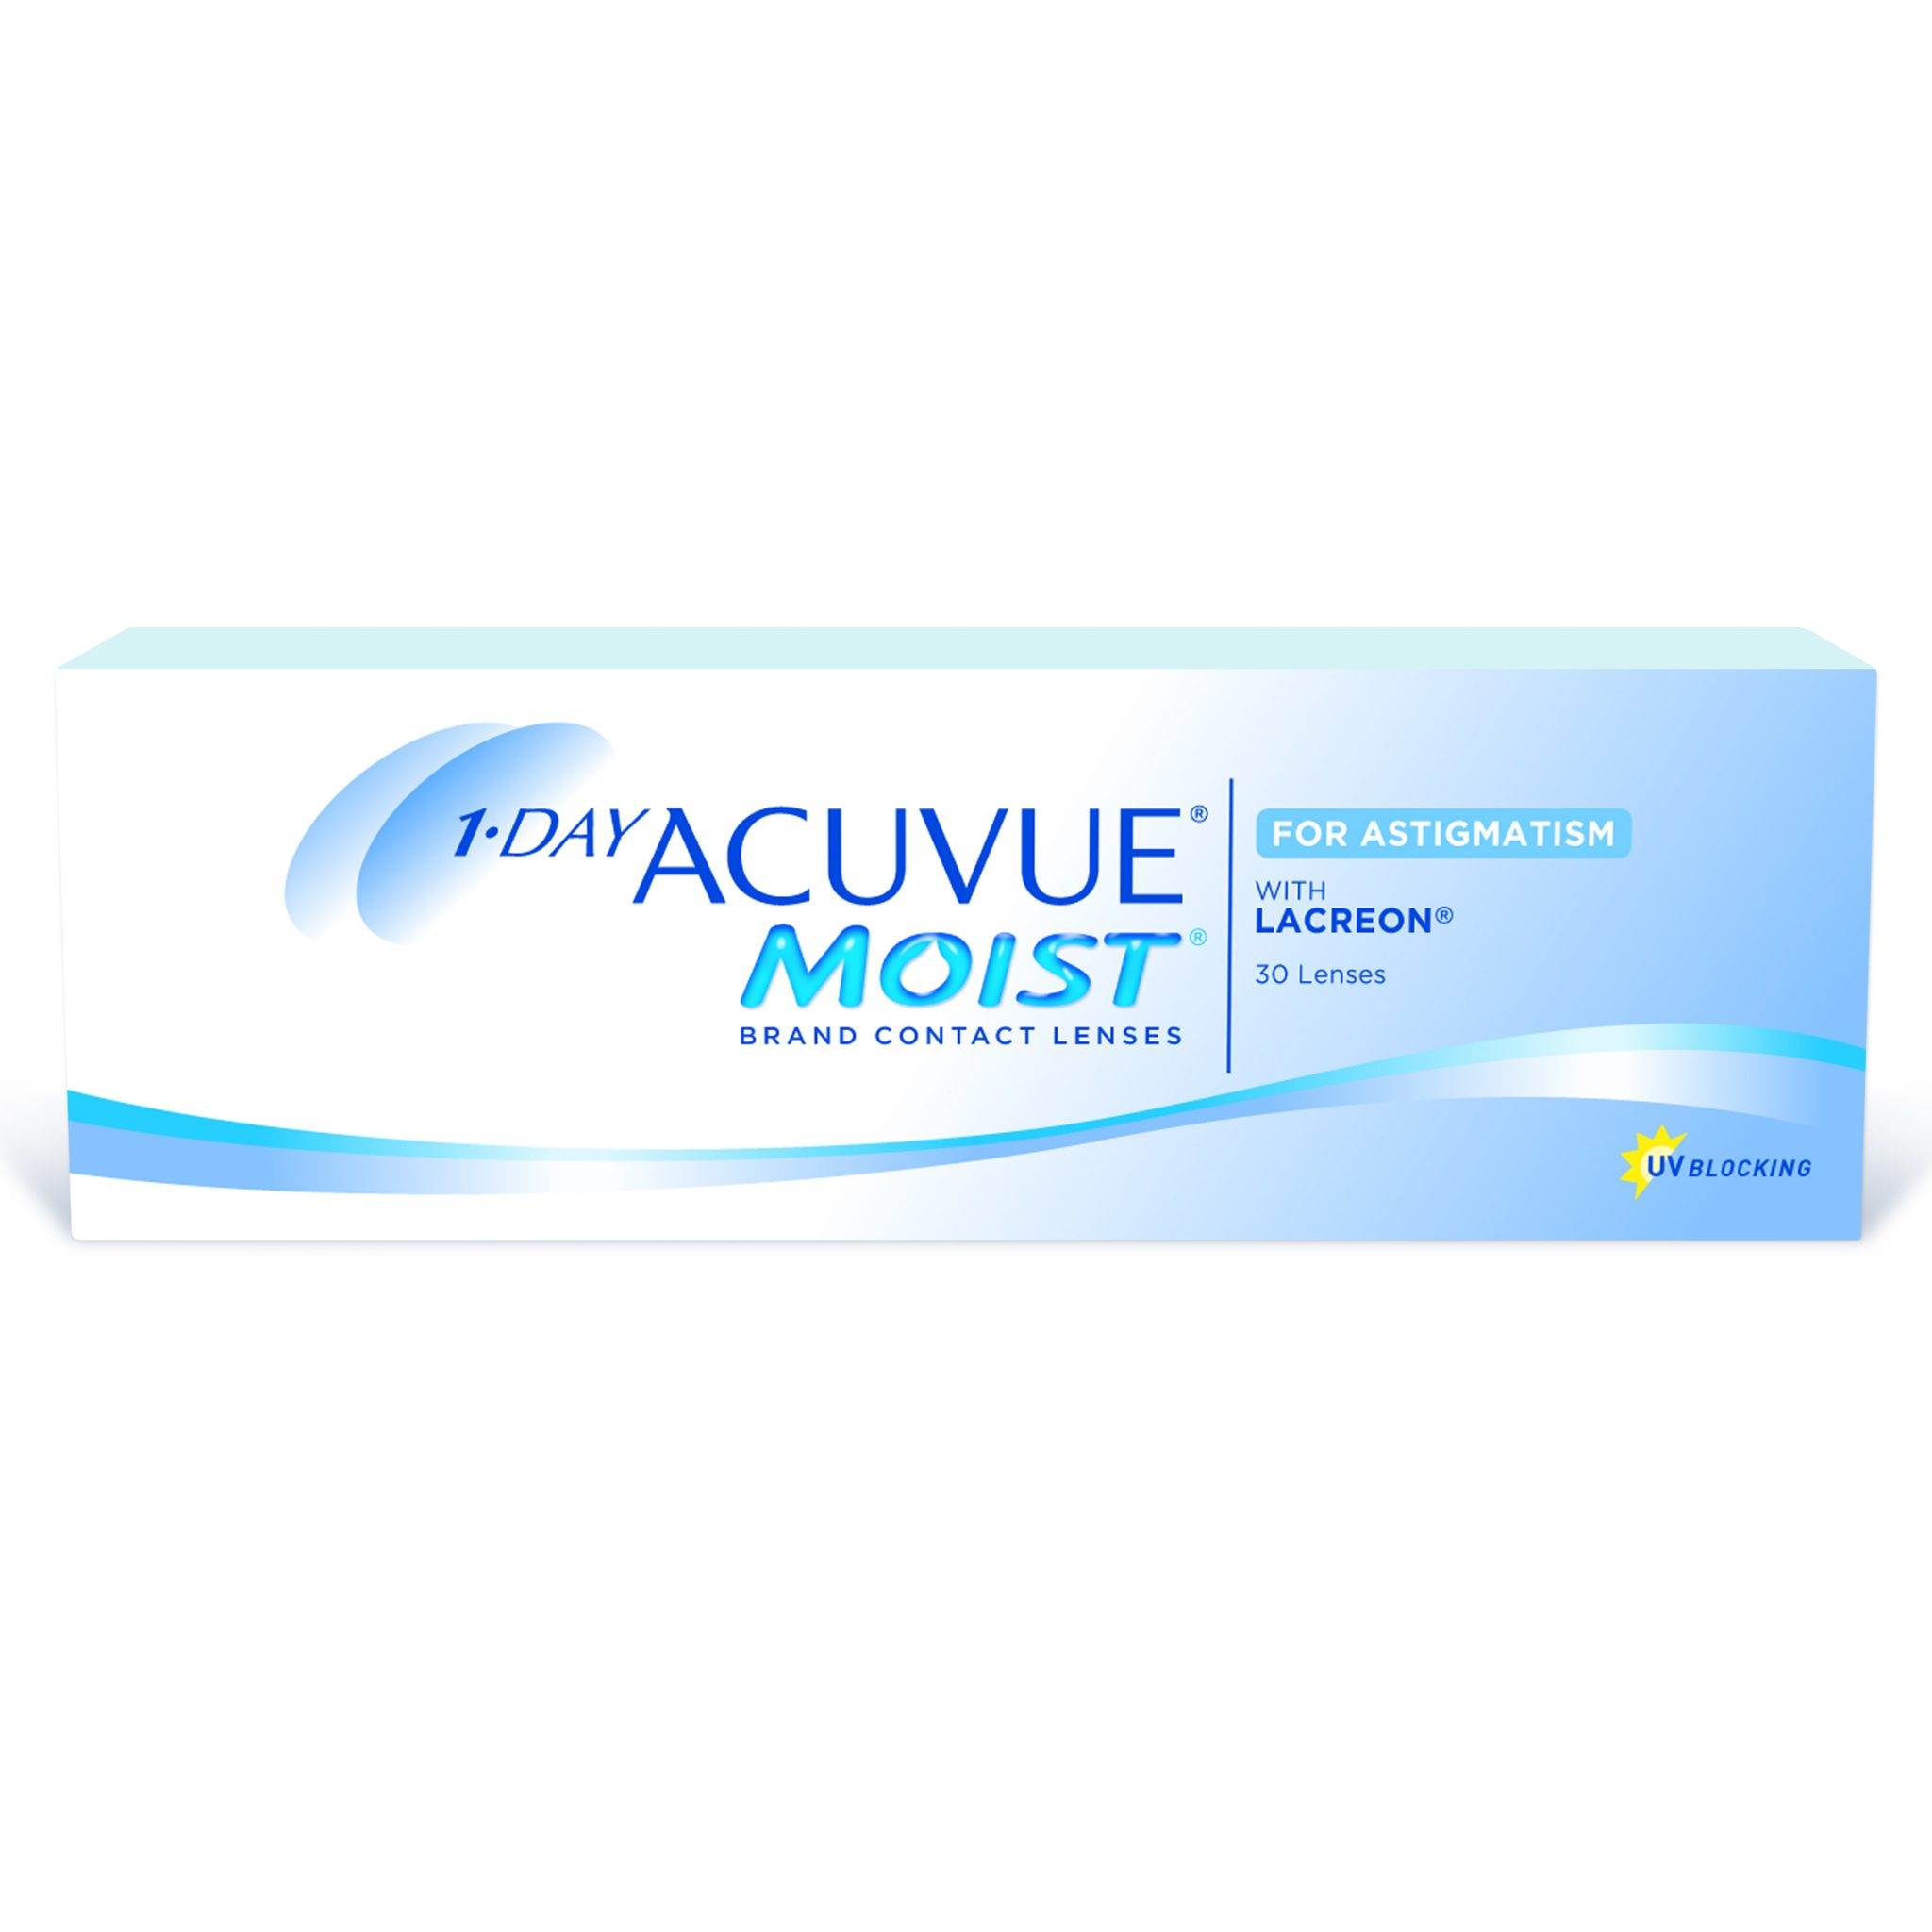 1 Day Acuvue Moist for Astigmatism with LACREON